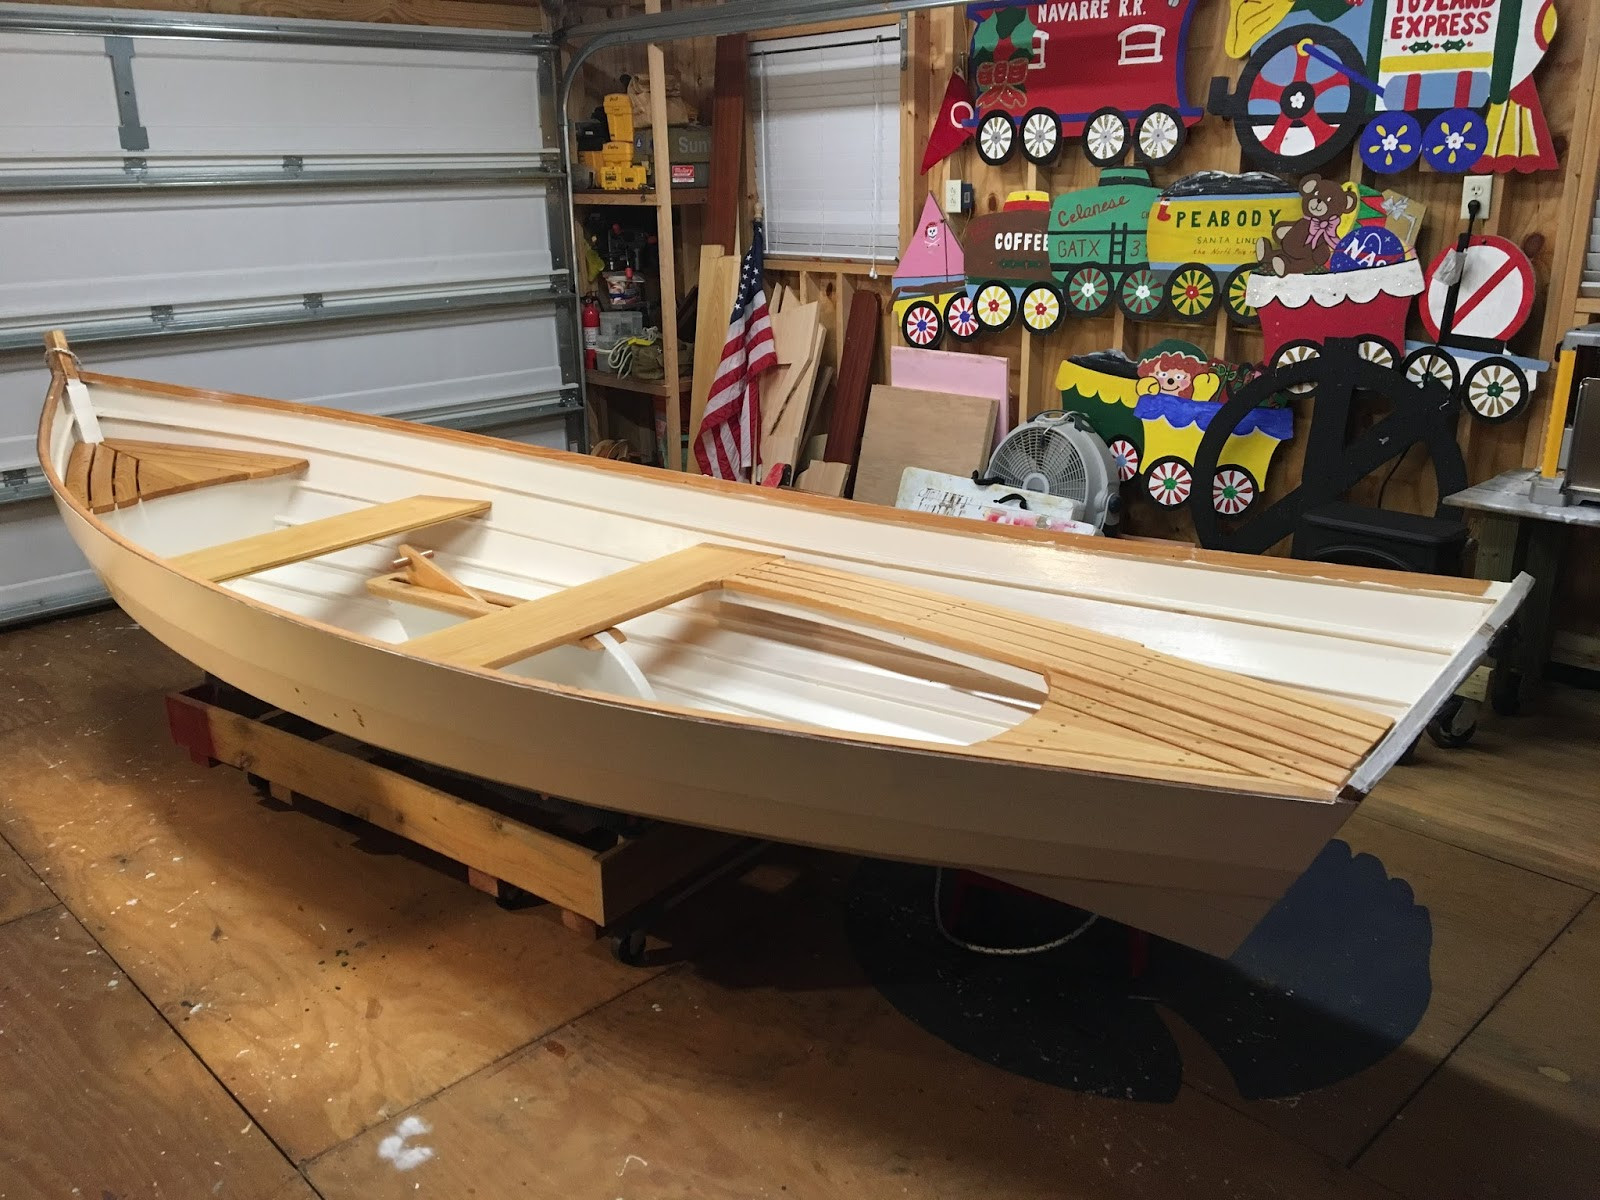 14 Amazing Hardwood Floor Refinishing In Louisville Kentucky 2024 free download hardwood floor refinishing in louisville kentucky of ideas on garage setup for boat build pertaining to now it is on a cradle with medium size wheels where i can roll it around to the sandin